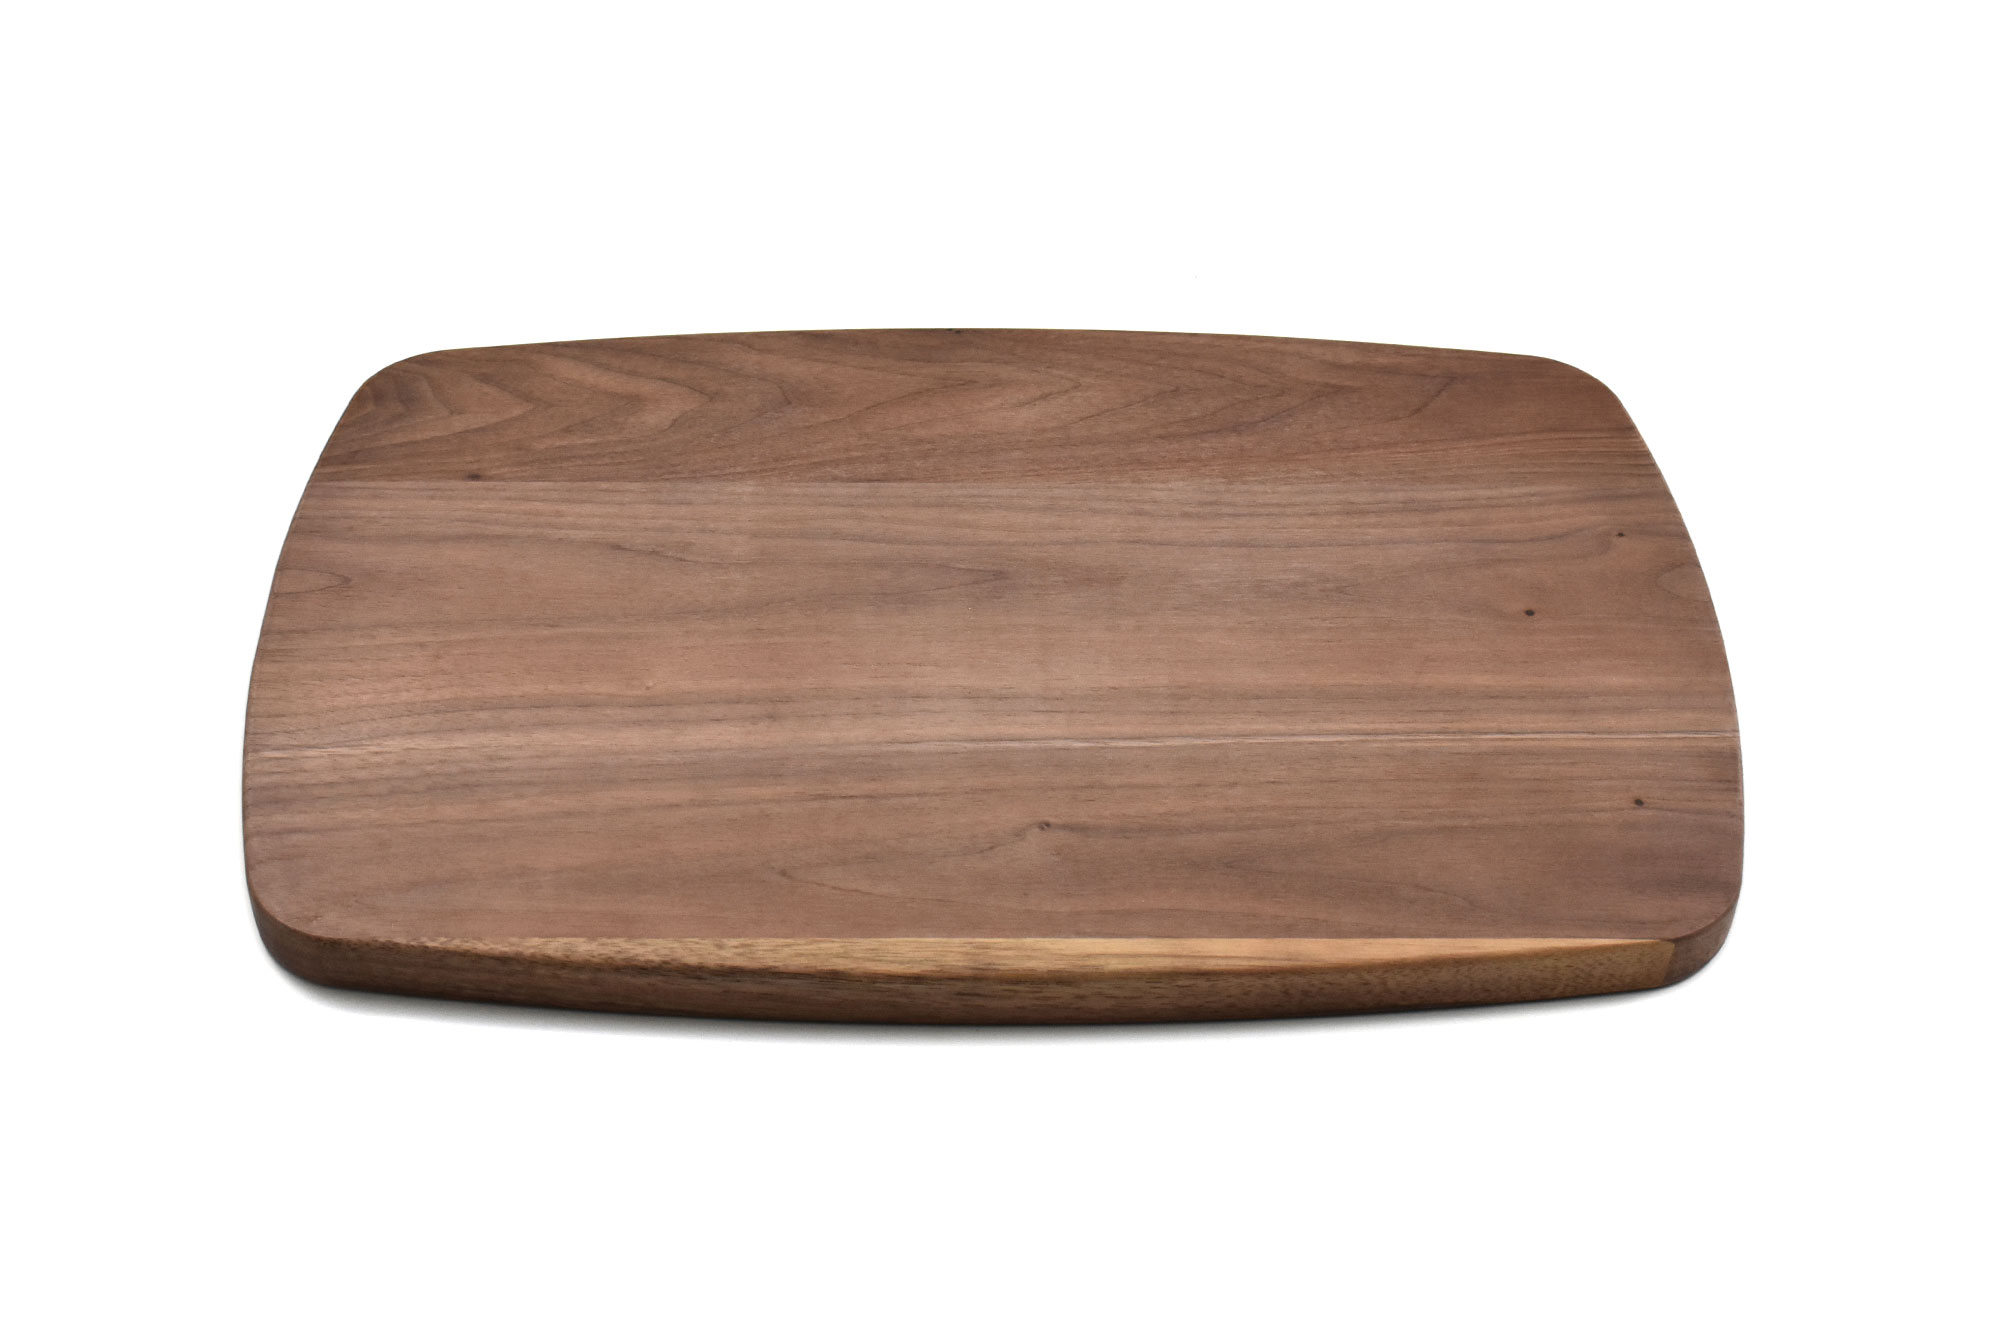 Walnut large rectangular curved cutting board with rounded corners